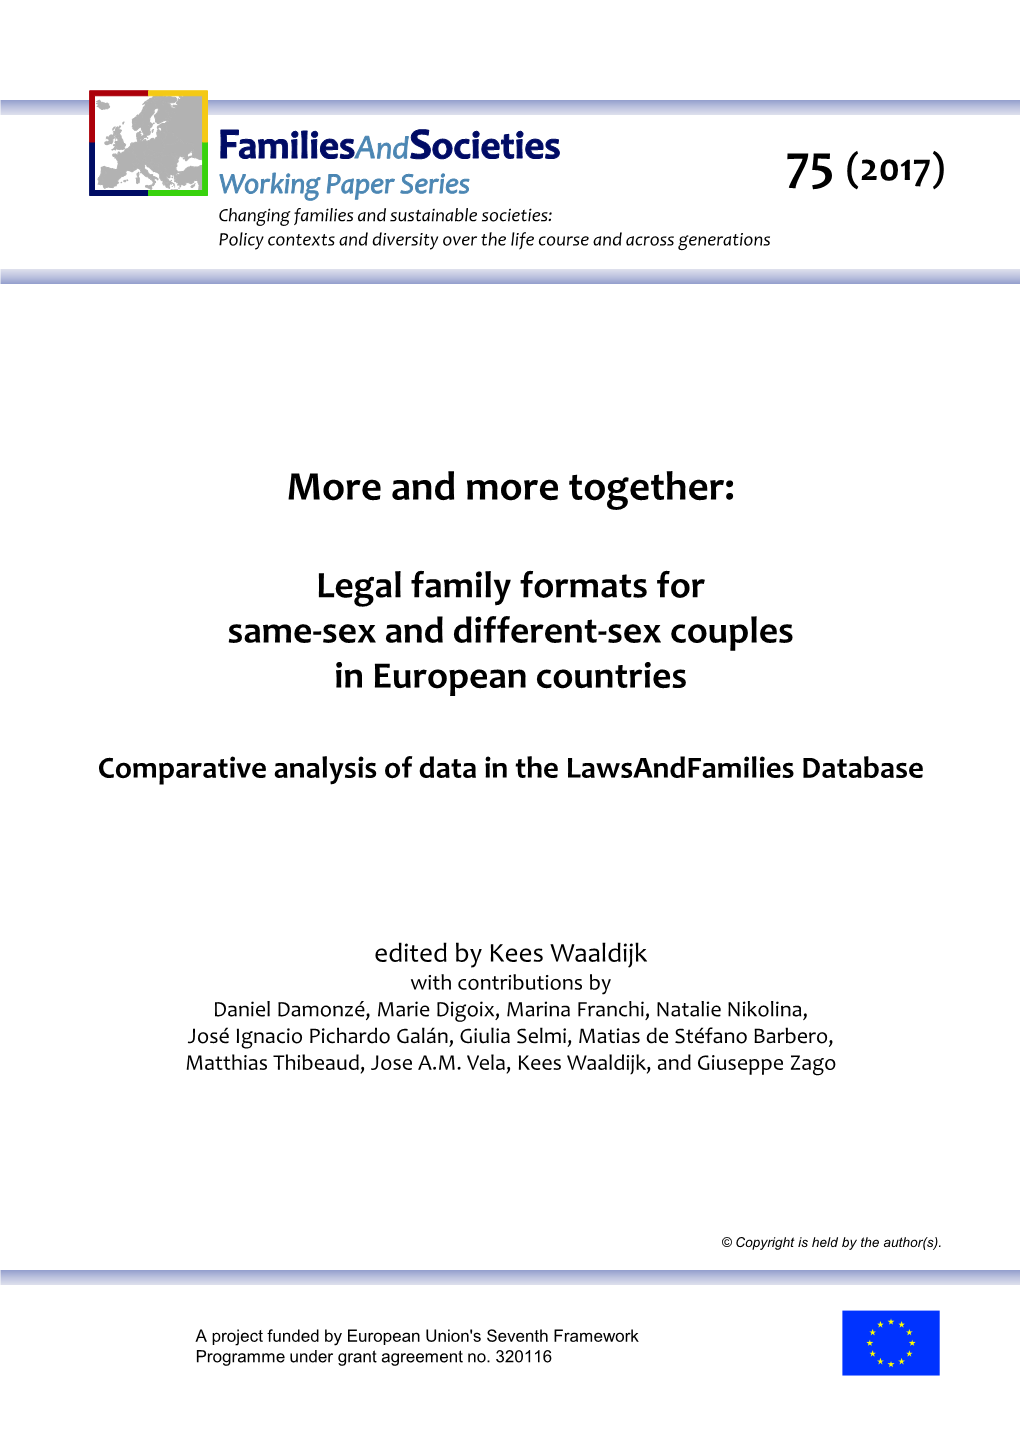 More and More Together: Legal Family Formats For